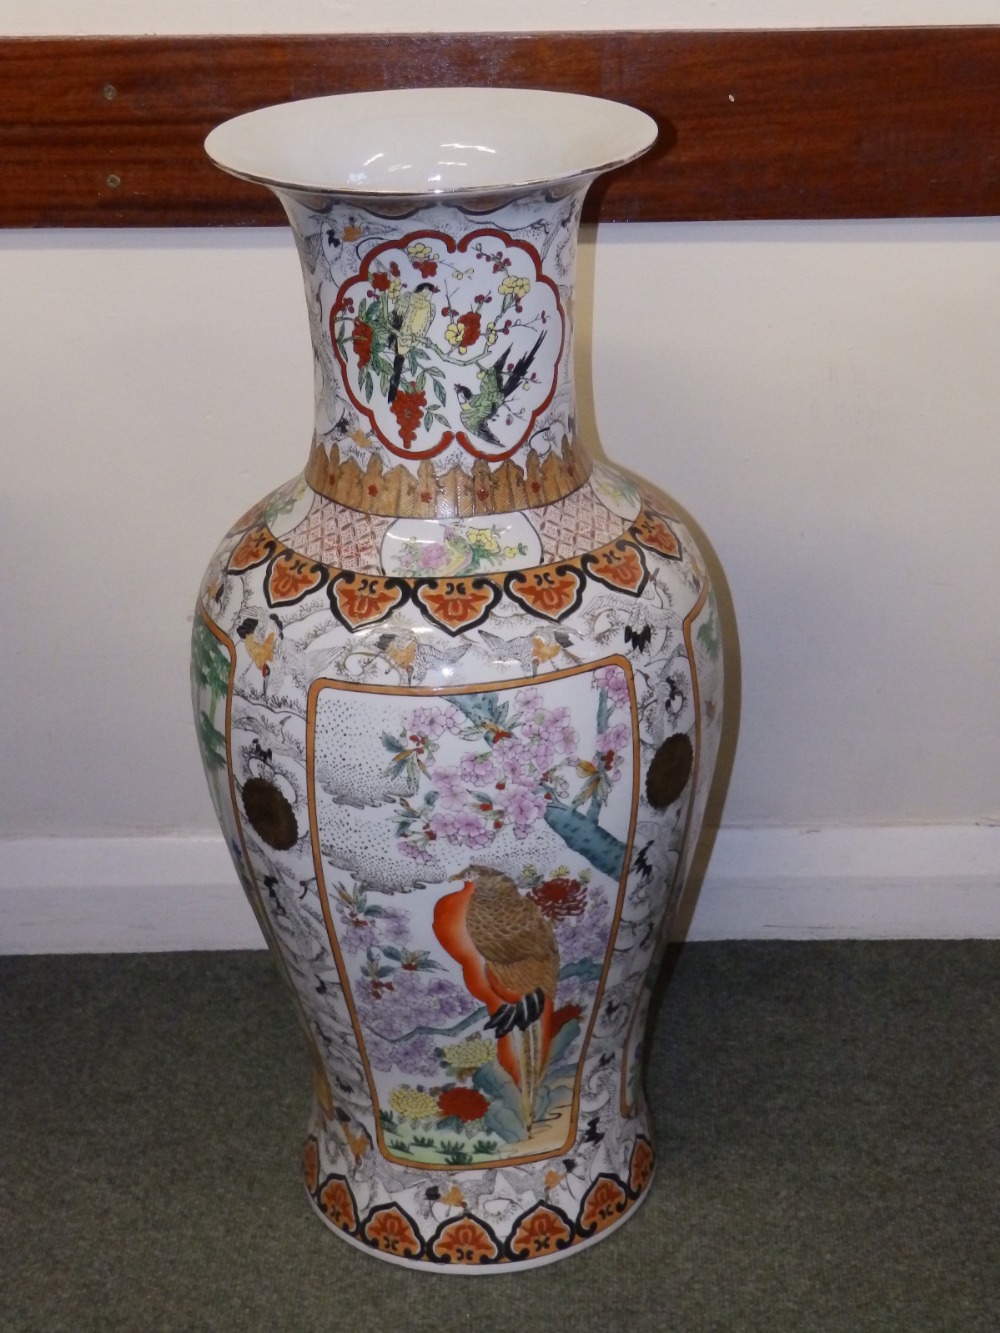 A large 20thC Chinese porcelain vase decorated with birds in panels, 32.5” high.